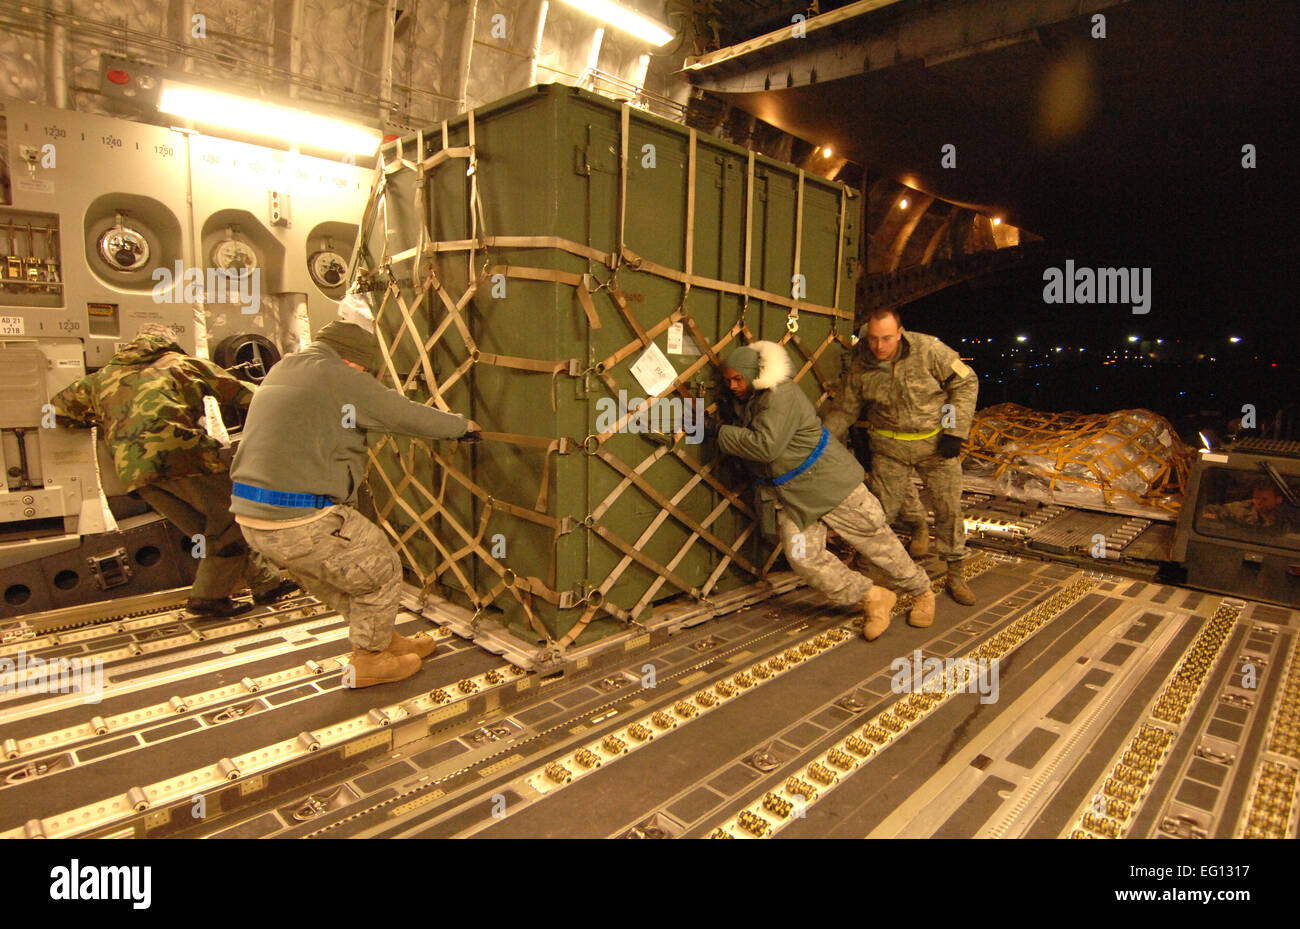 U.S. Air Force service members from the 305th Aerial Port Squadron, out of McGuire, AFB, New Jersey, load humanitarian supplies Friday, January 15th, 2010, onto a C-17A Globemaster from the 729th Airlift Squadron, out of March, Air Reserve Base, bound for the Port-au-Prince International Airport, Haiti. The C-17 and crew, both out of the 452nd Air Mobility Wing at March Air Reserve Base, are taking part in the massive international effort to assist in rescue, recovery and humanitarian efforts following a 7.0 earthquake. President Barack Obama ordered a swift and aggressive rescue effort.  The  Stock Photo